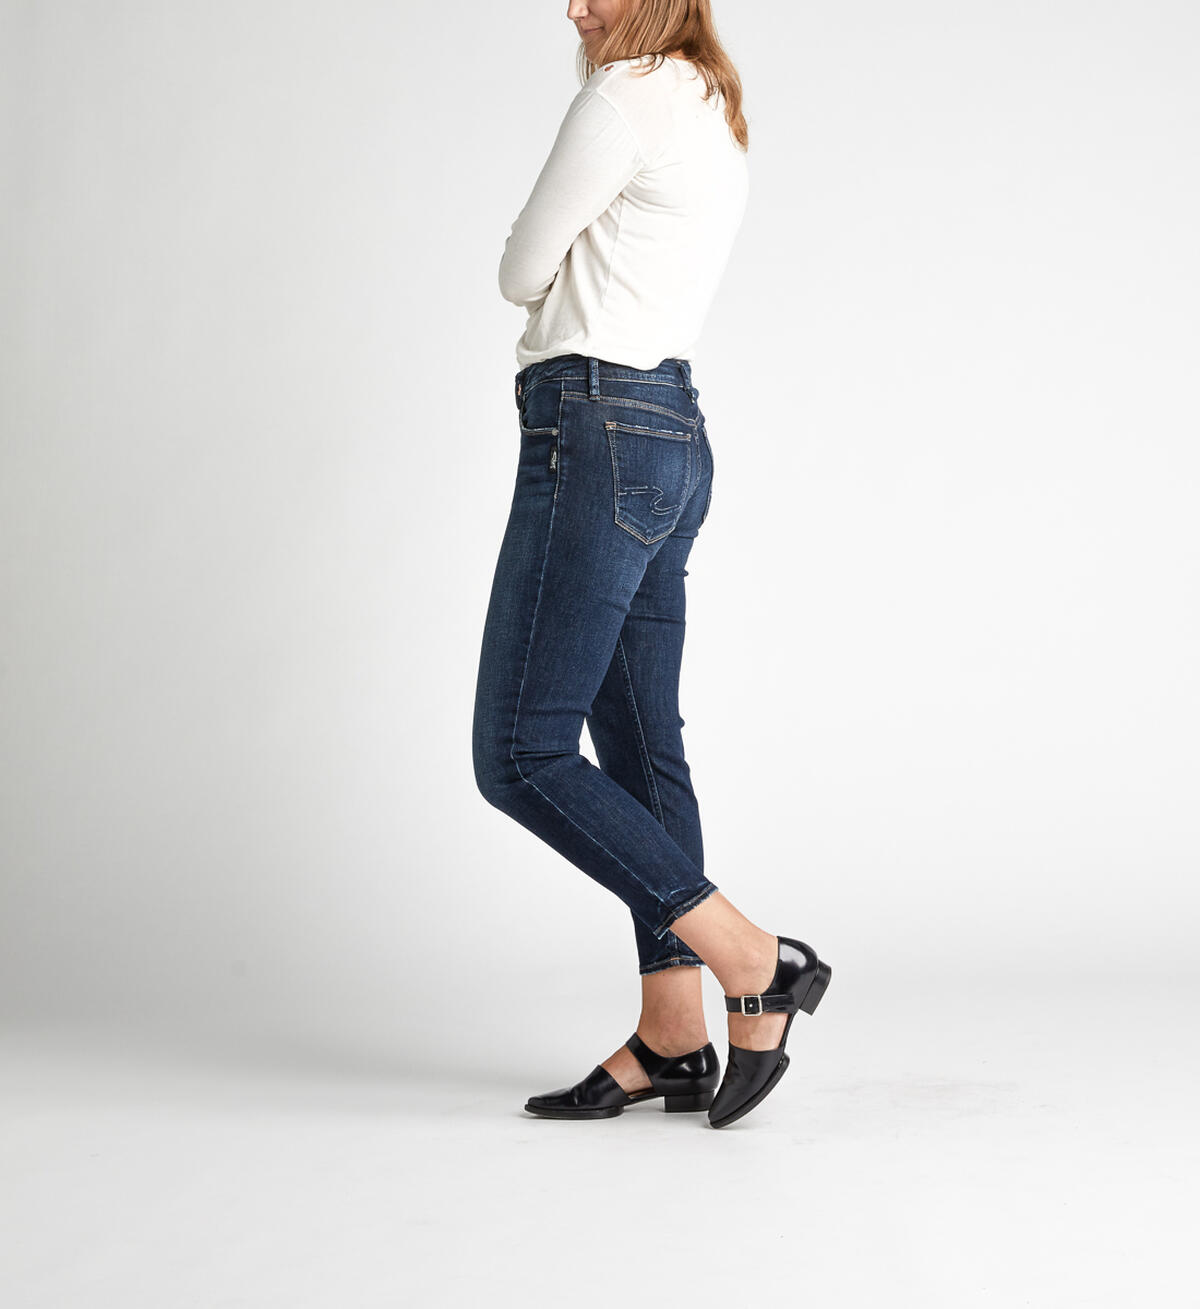 Avery High-Rise Curvy Skinny Crop Jeans, , hi-res image number 6